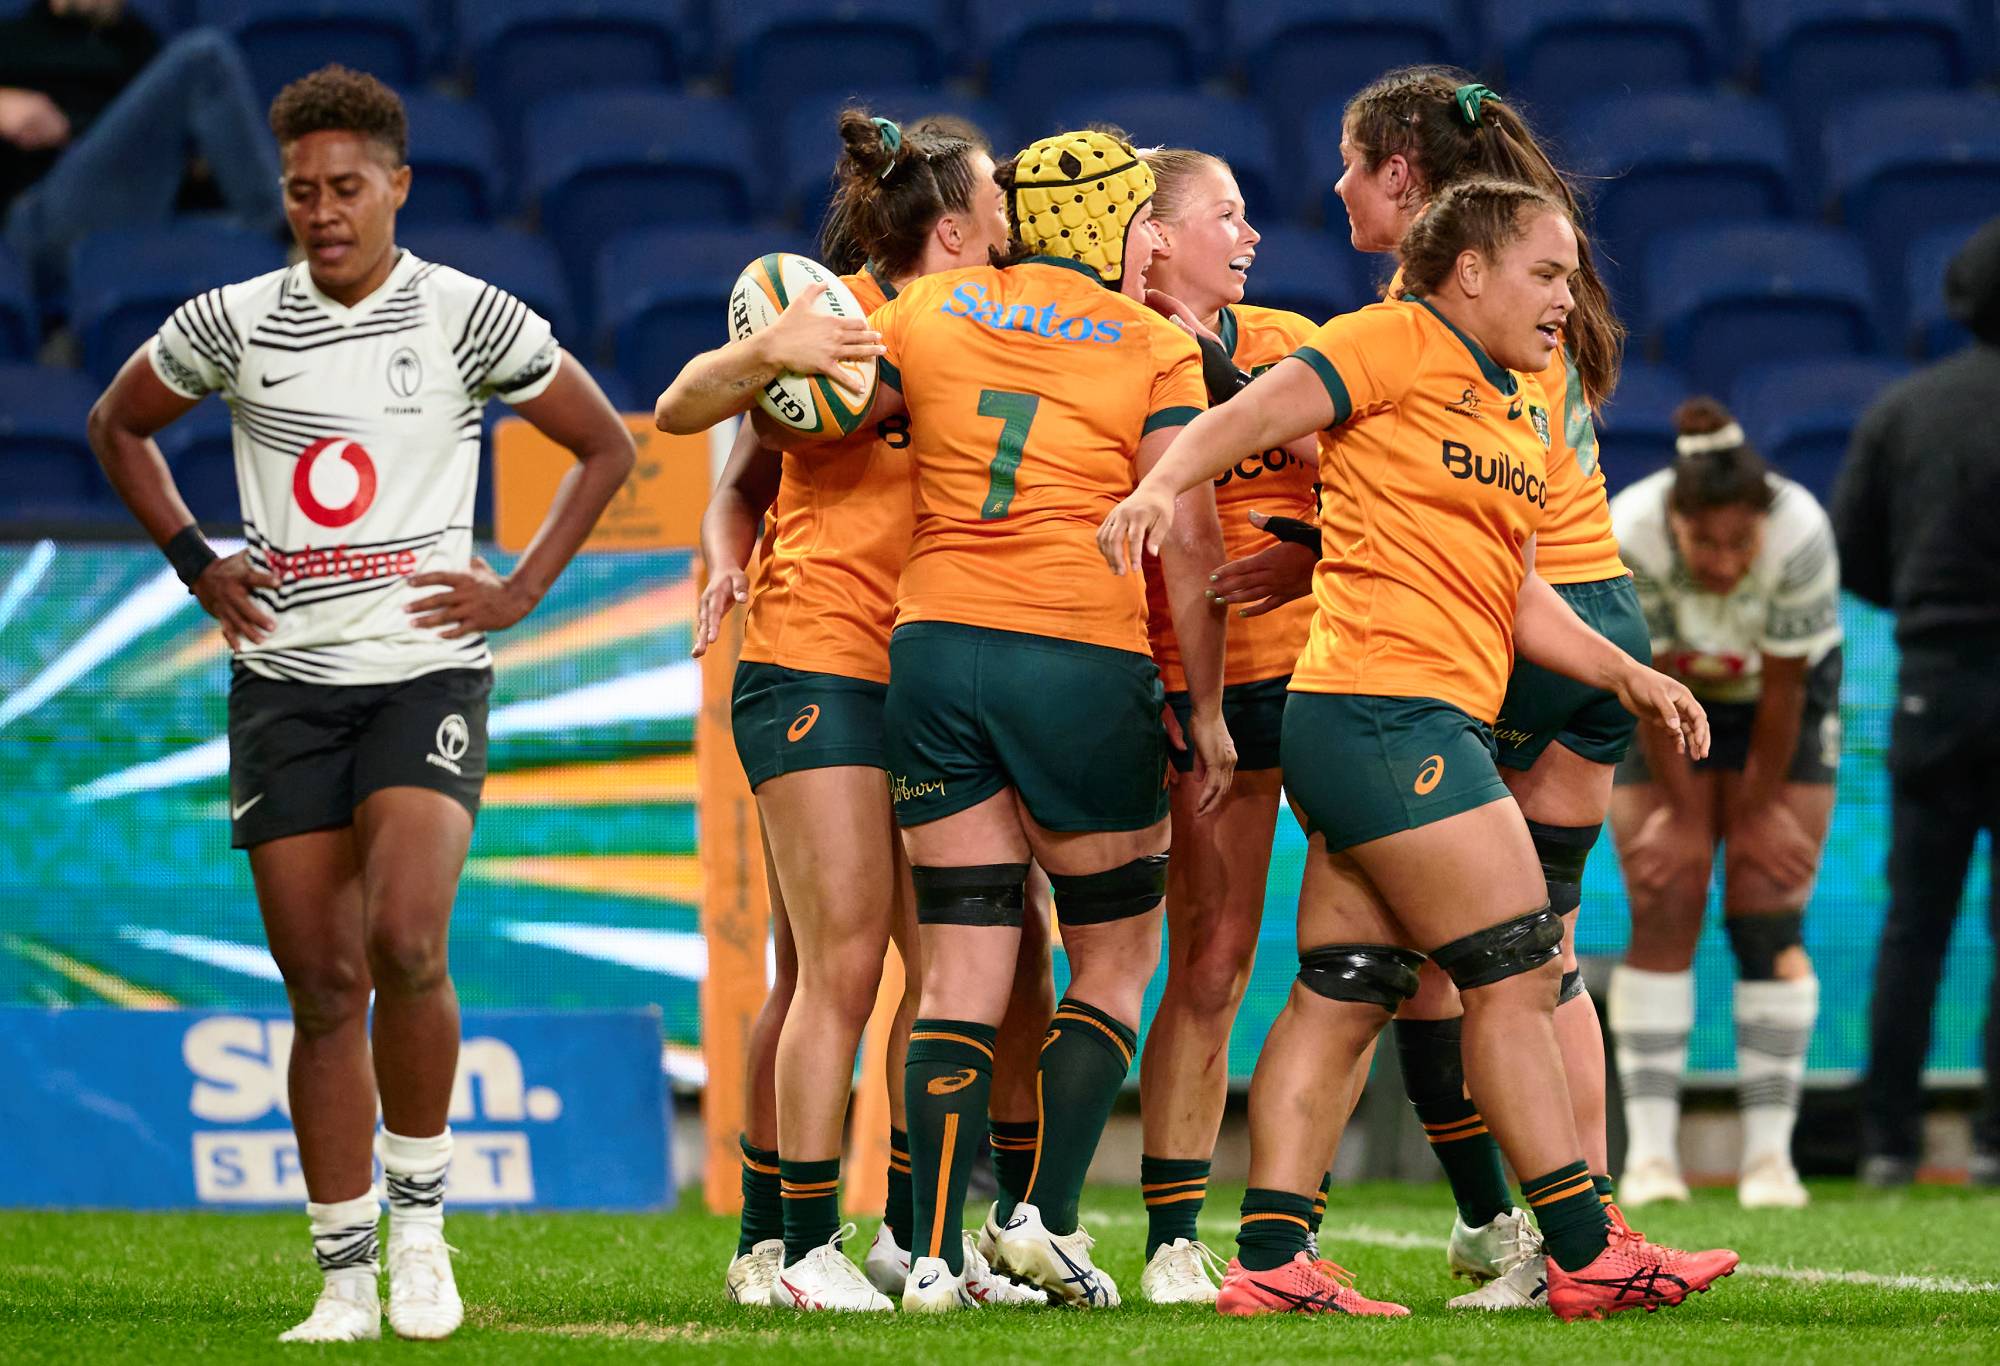 Parry signs off a winner as Marsters leads Wallaroos to big win over Fiji – The Roar